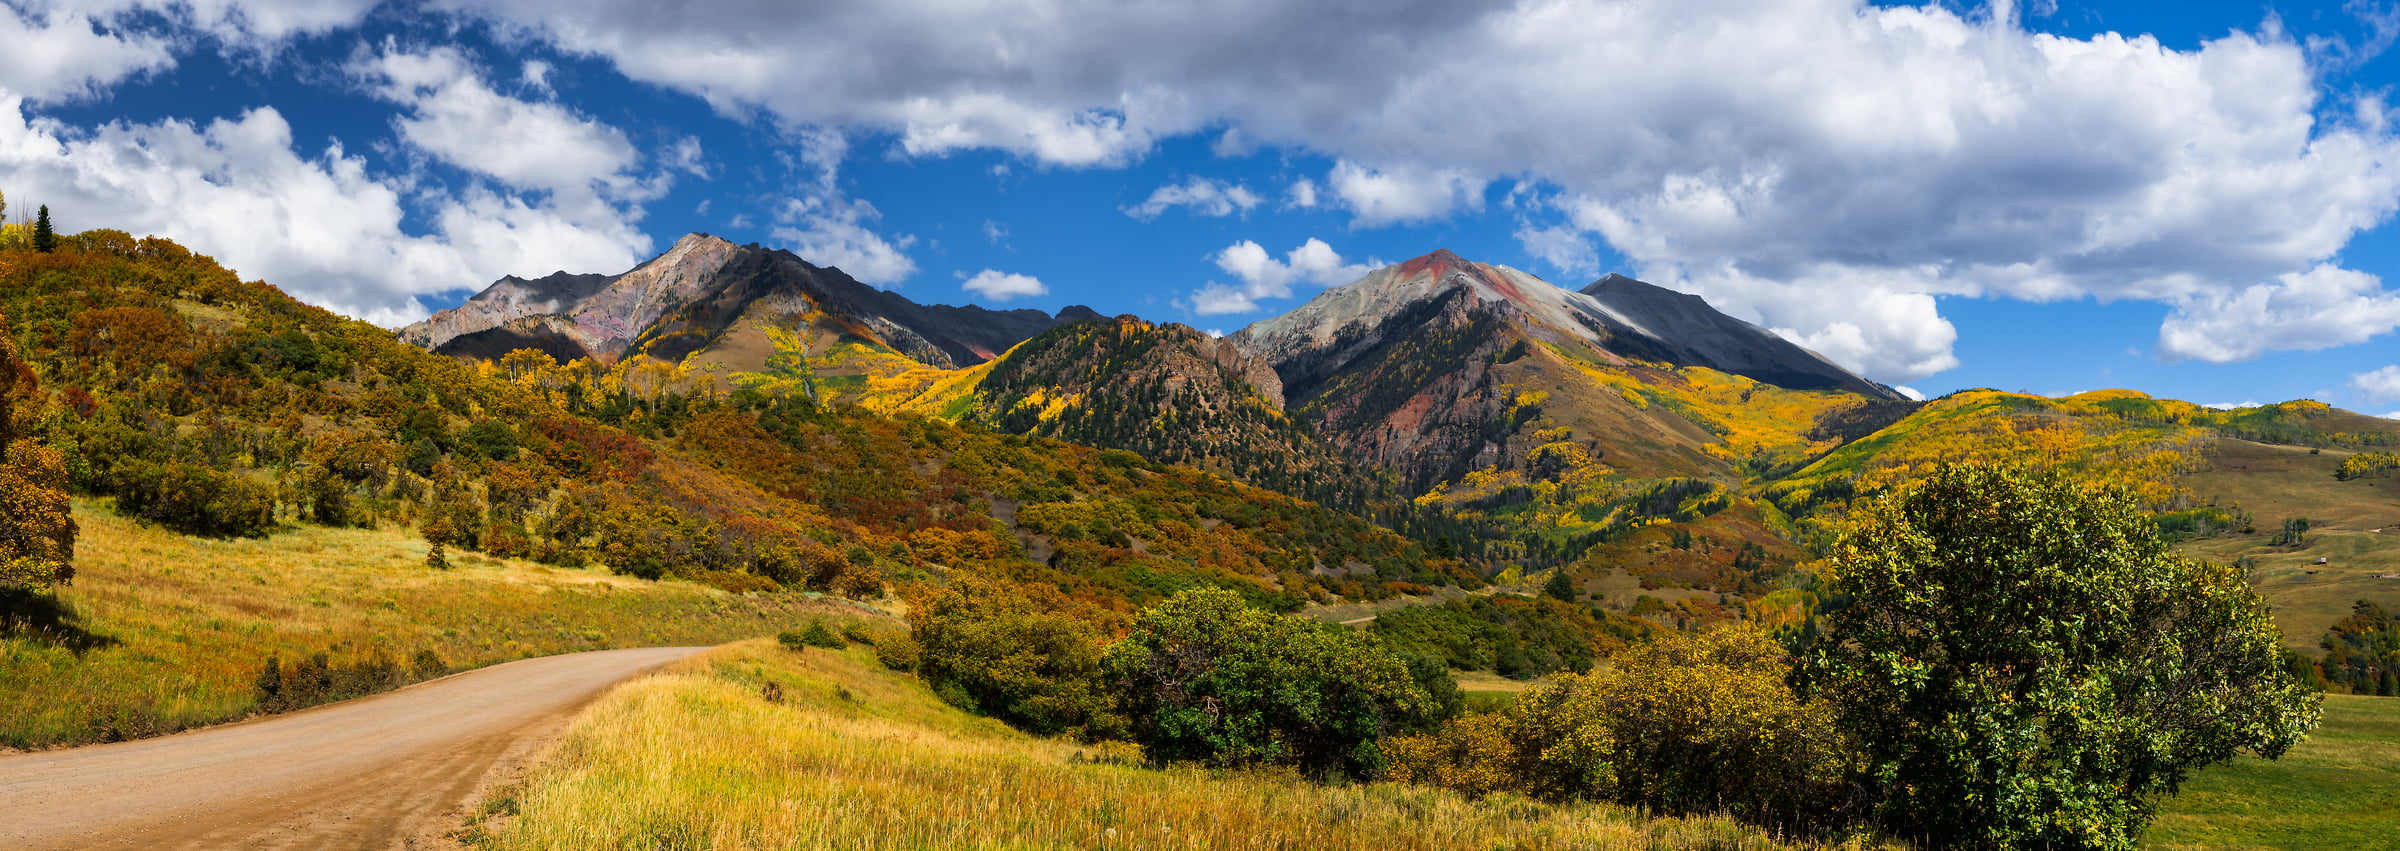 181 megapixels! A very high resolution, large-format VAST photo print of a Colorado landscape with mountains in autumn; photograph created by Phillip Noll in Telluride, Colorado.